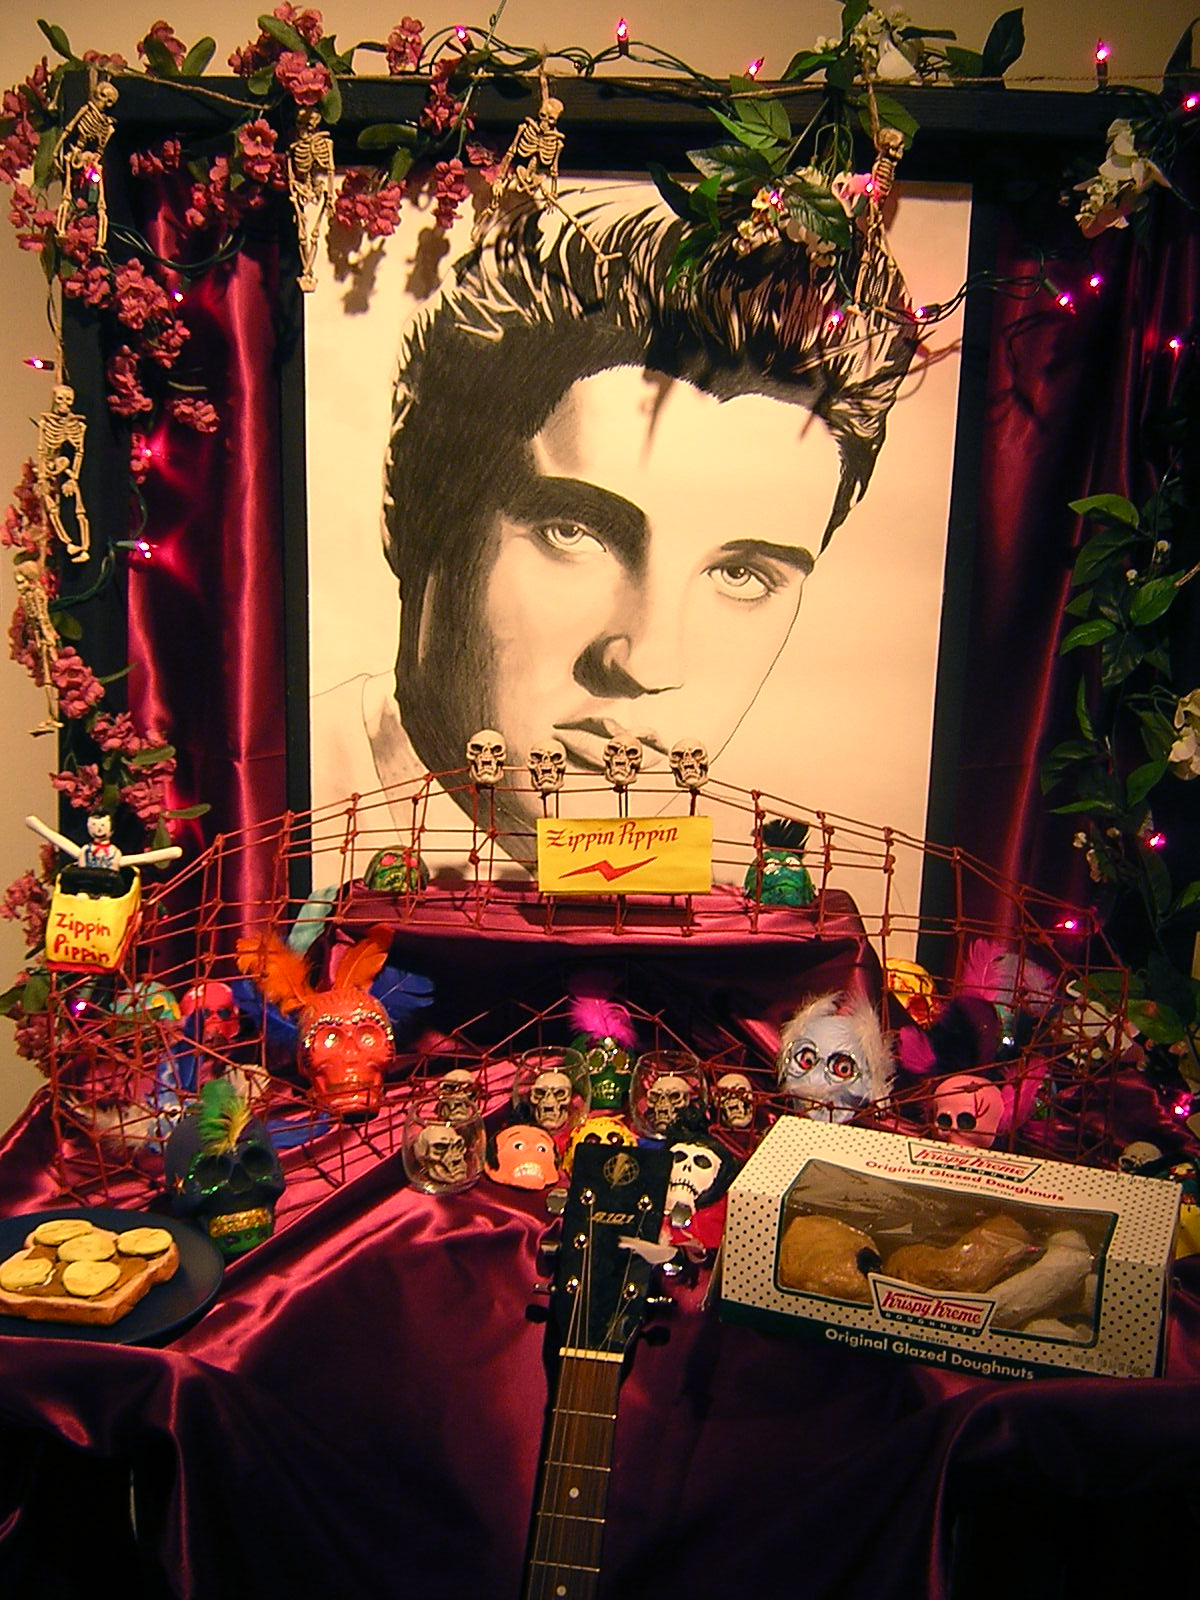 a table topped with a guitar, cake and a painting of elvis